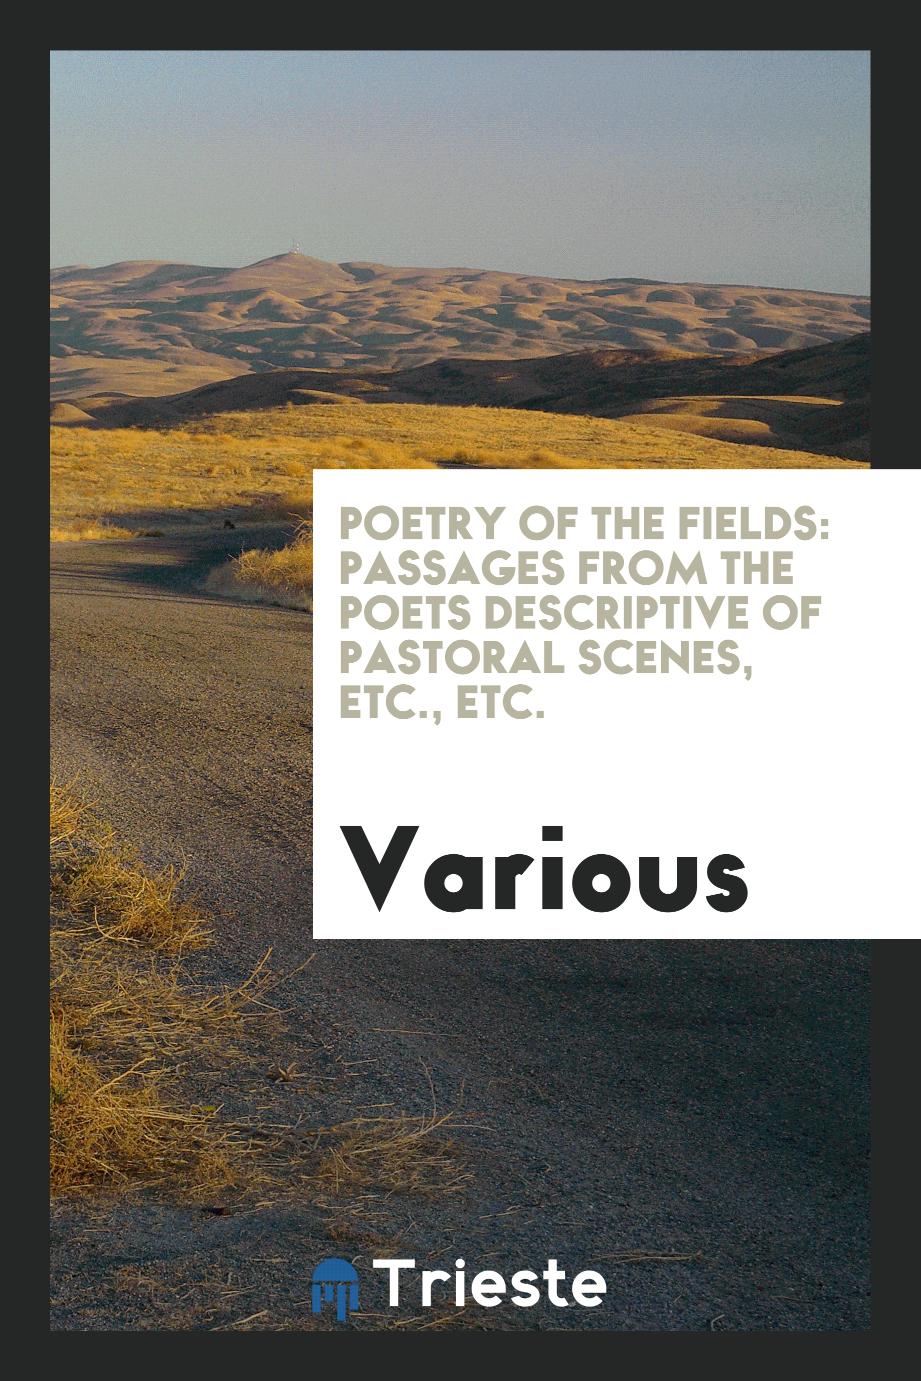 Poetry of the Fields: Passages from the Poets Descriptive of Pastoral Scenes, Etc., Etc.